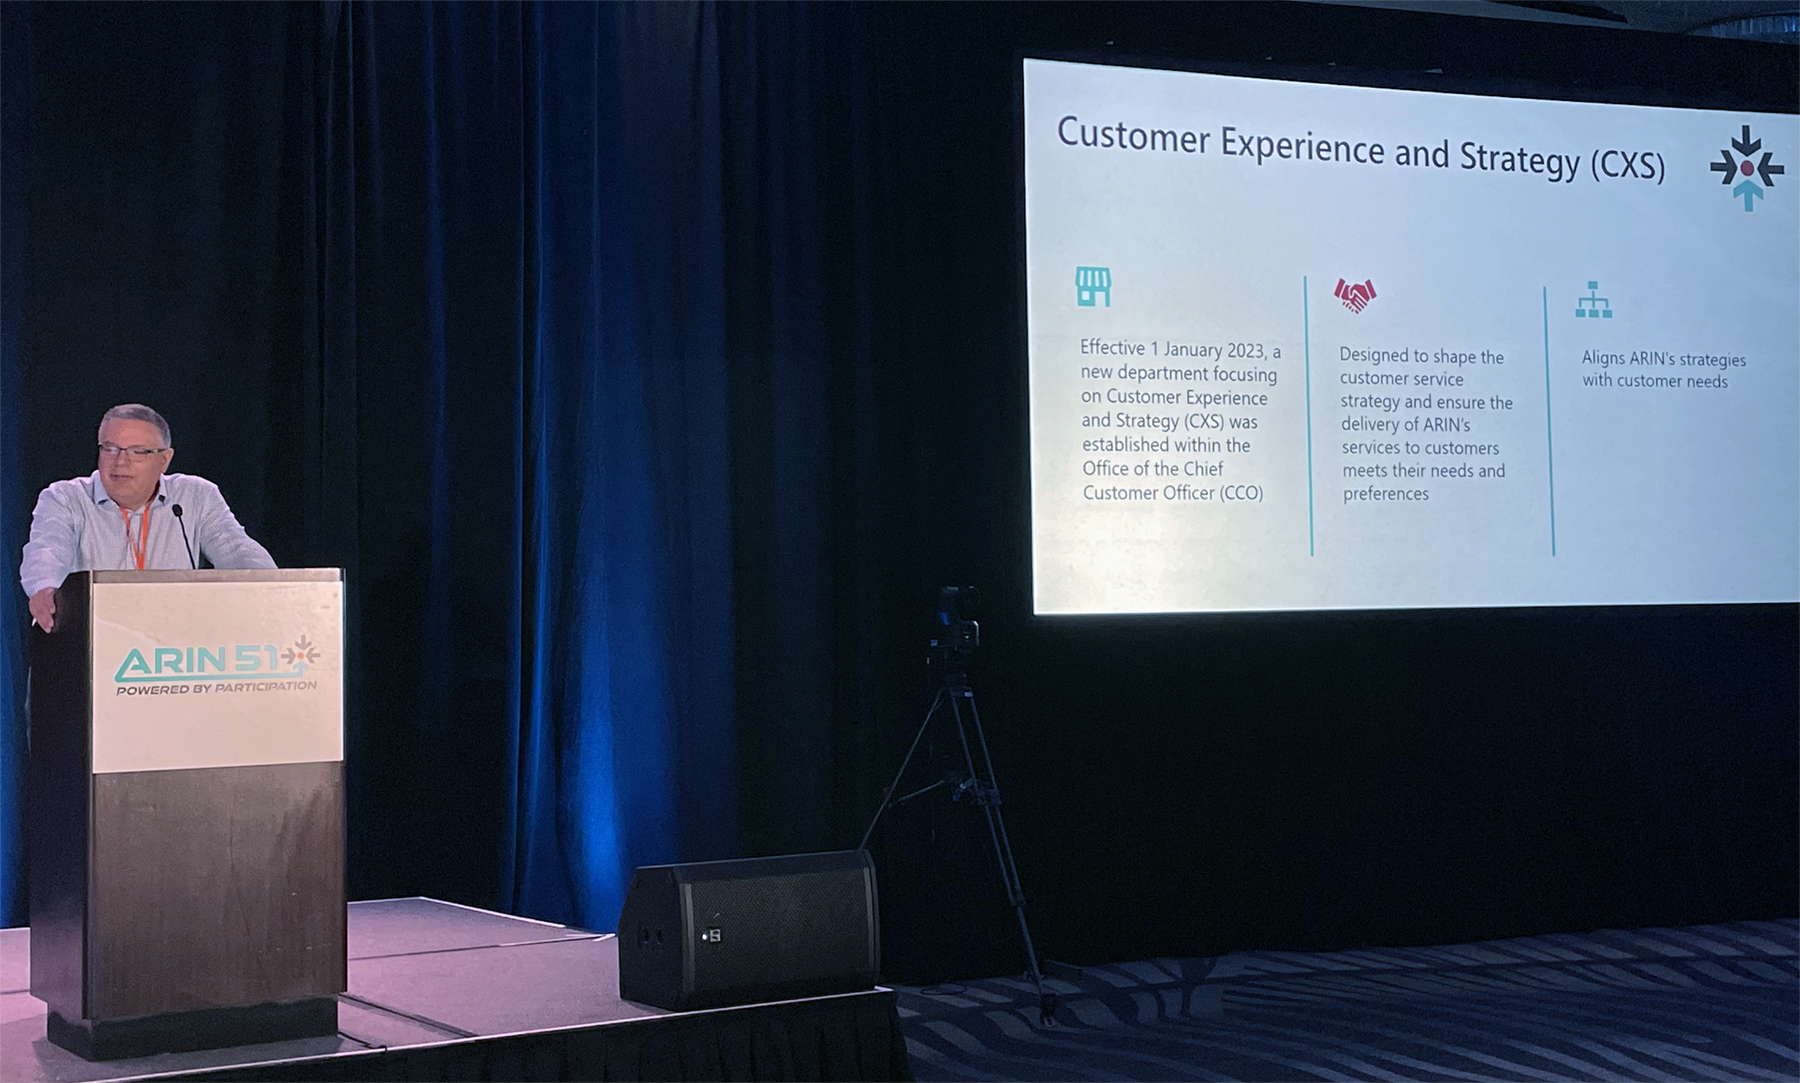 Customer Experience and Strategy report by Joe Westover